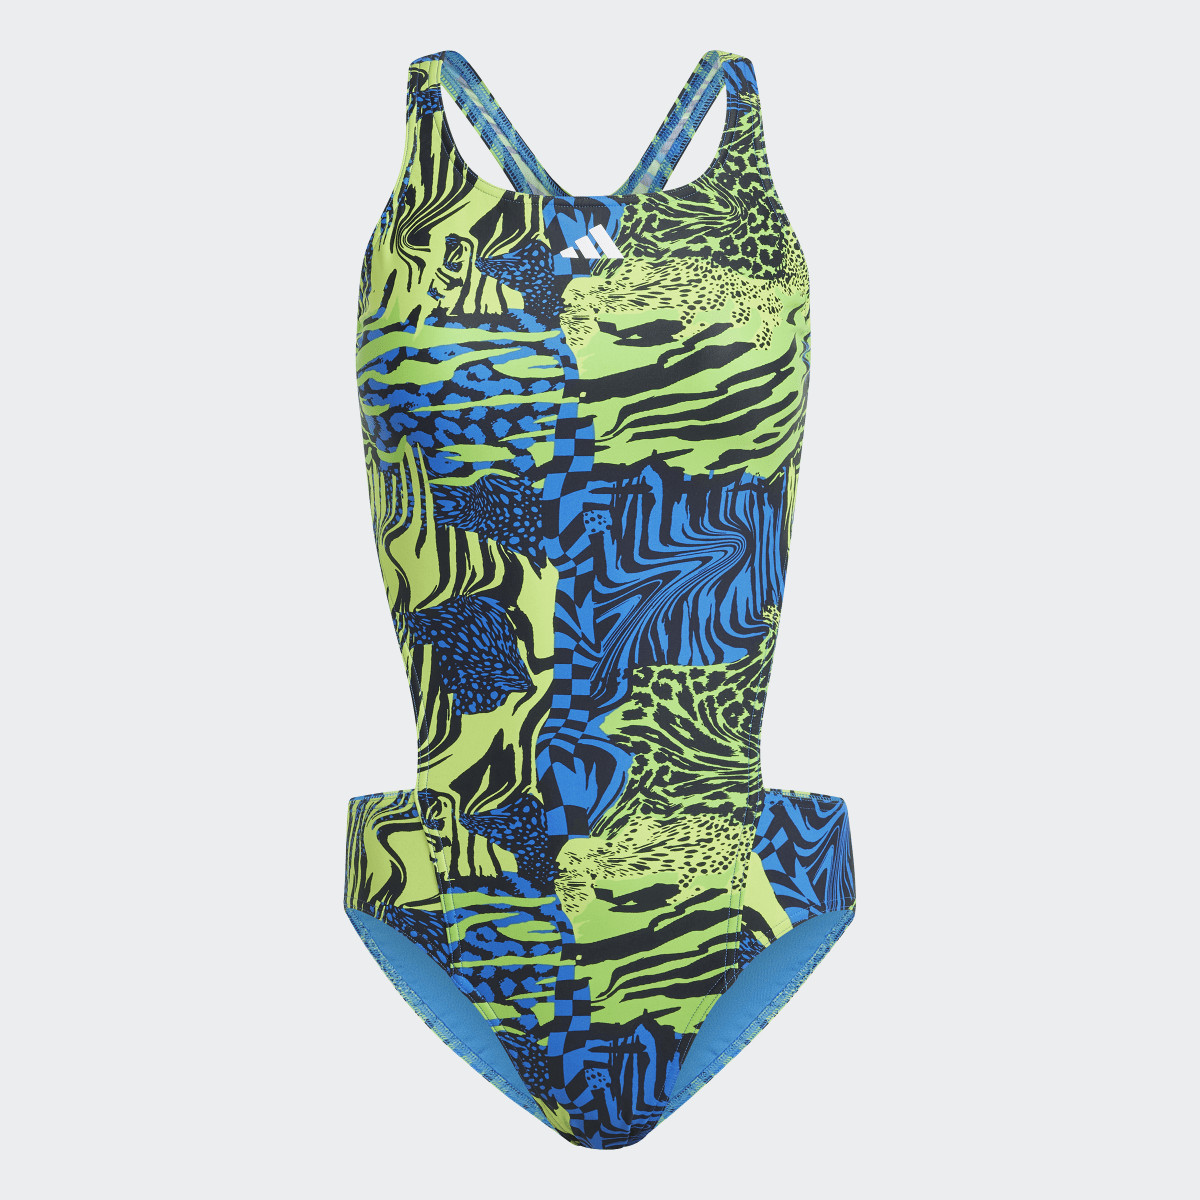 Adidas Allover Graphic Swimsuit. 5